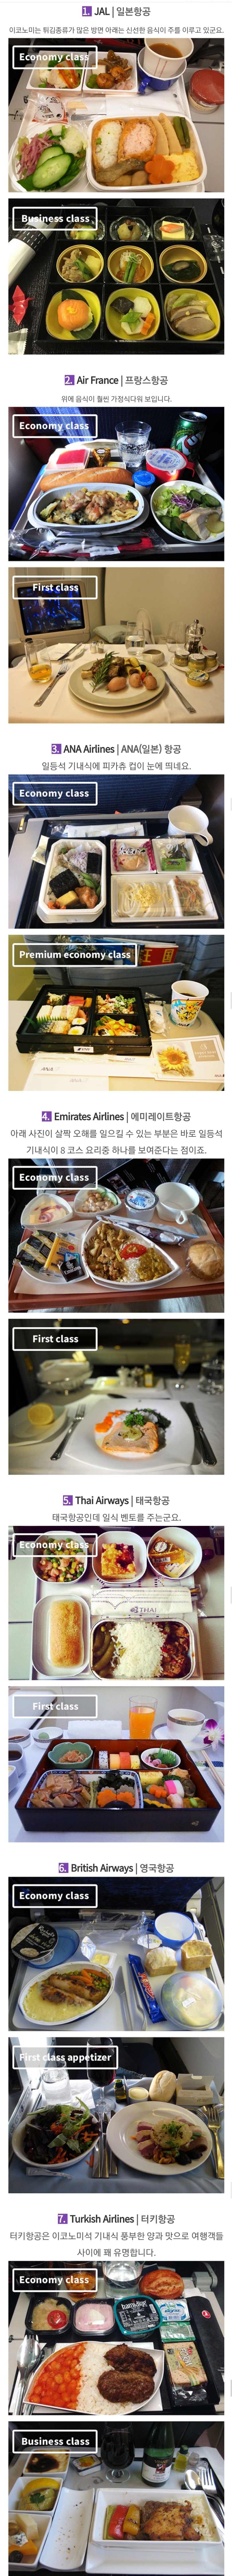 In-flight meals for each airline in each airline.jpg